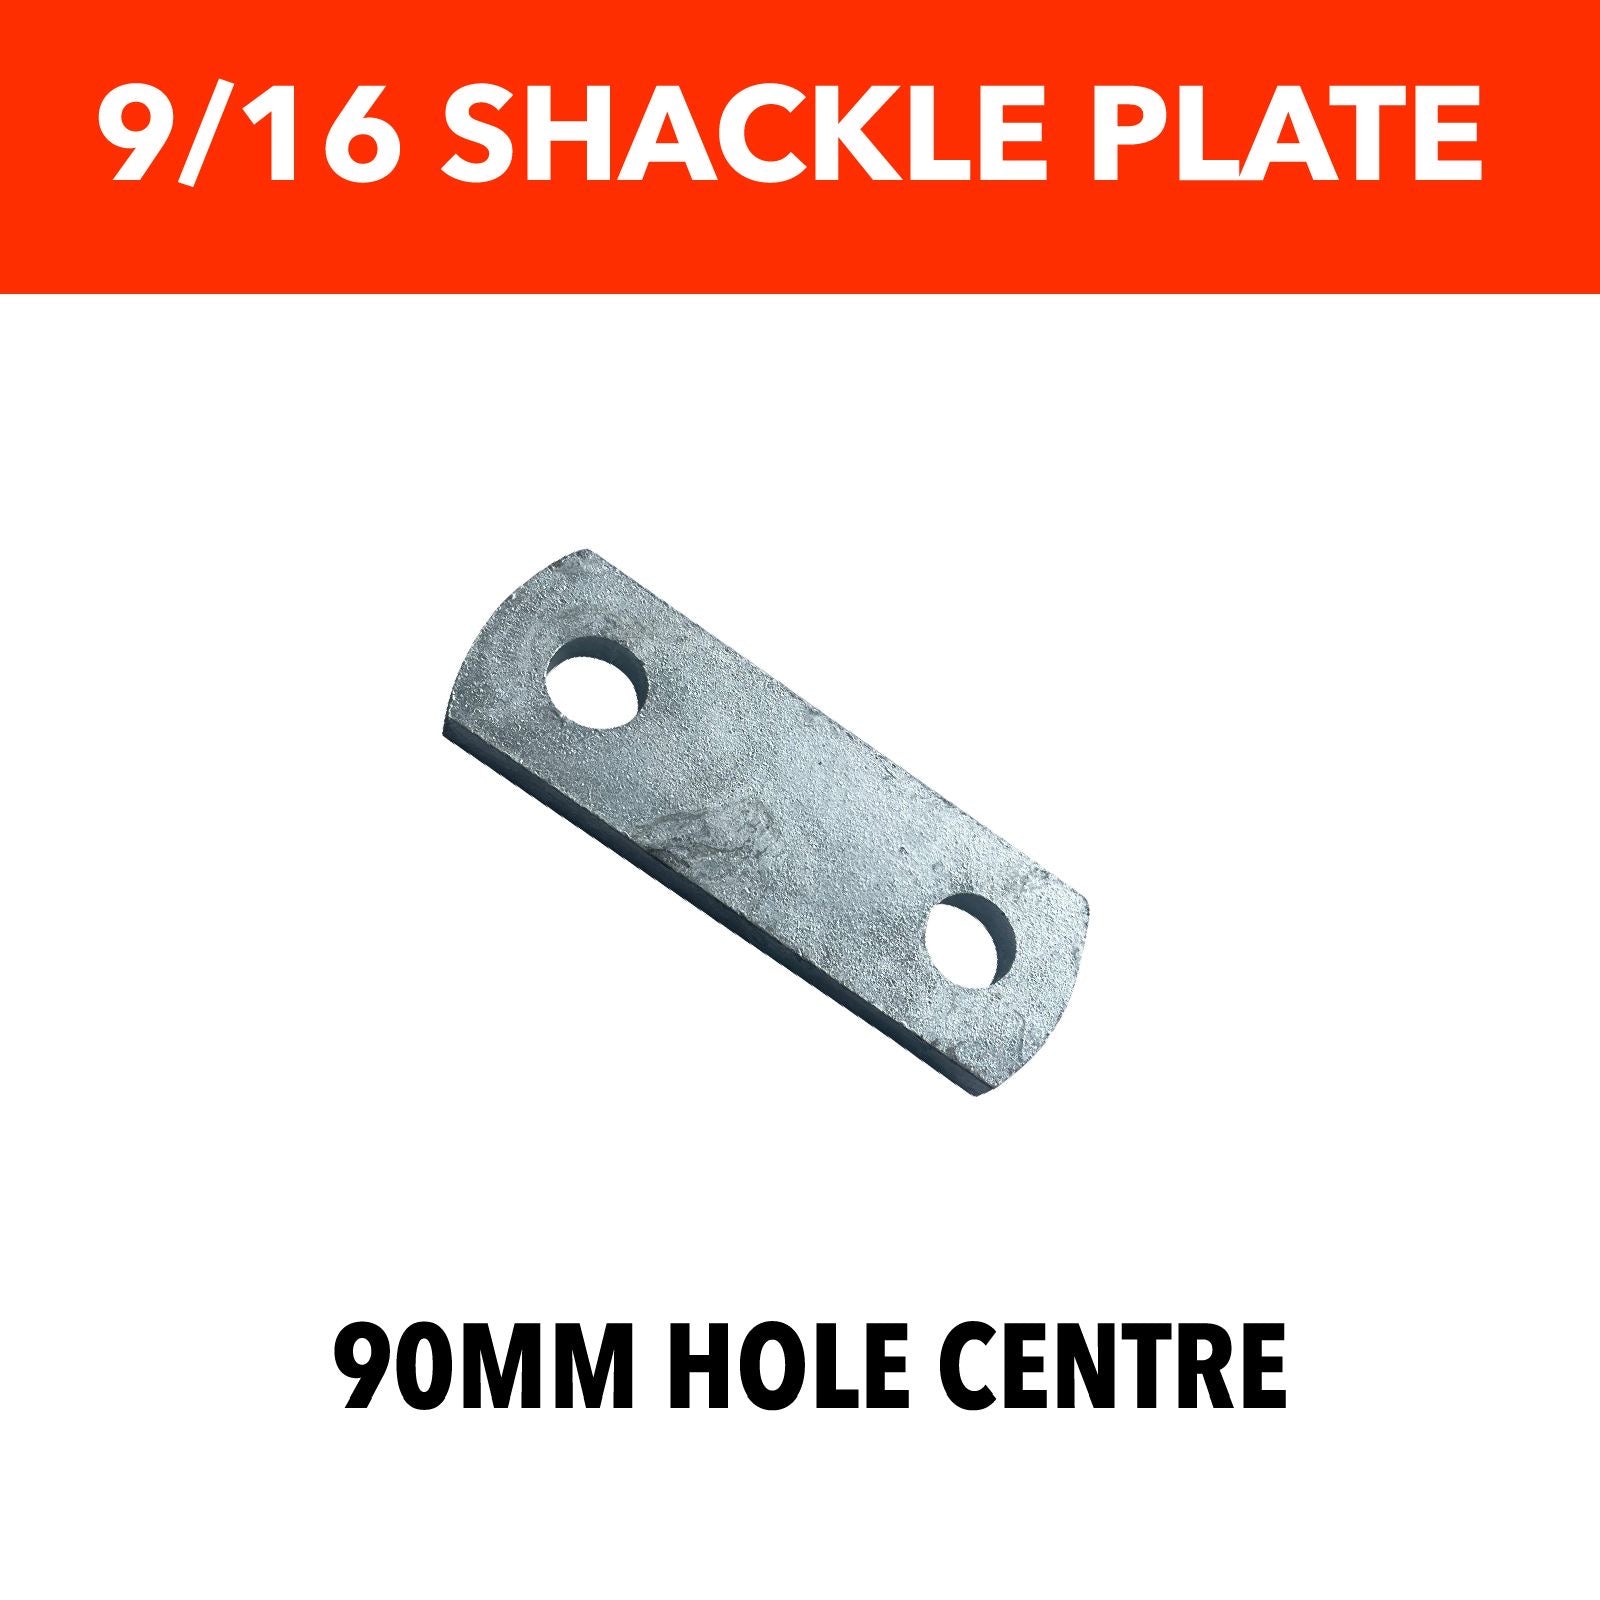 9/16 Shackle Plate 90mm Hole Centre